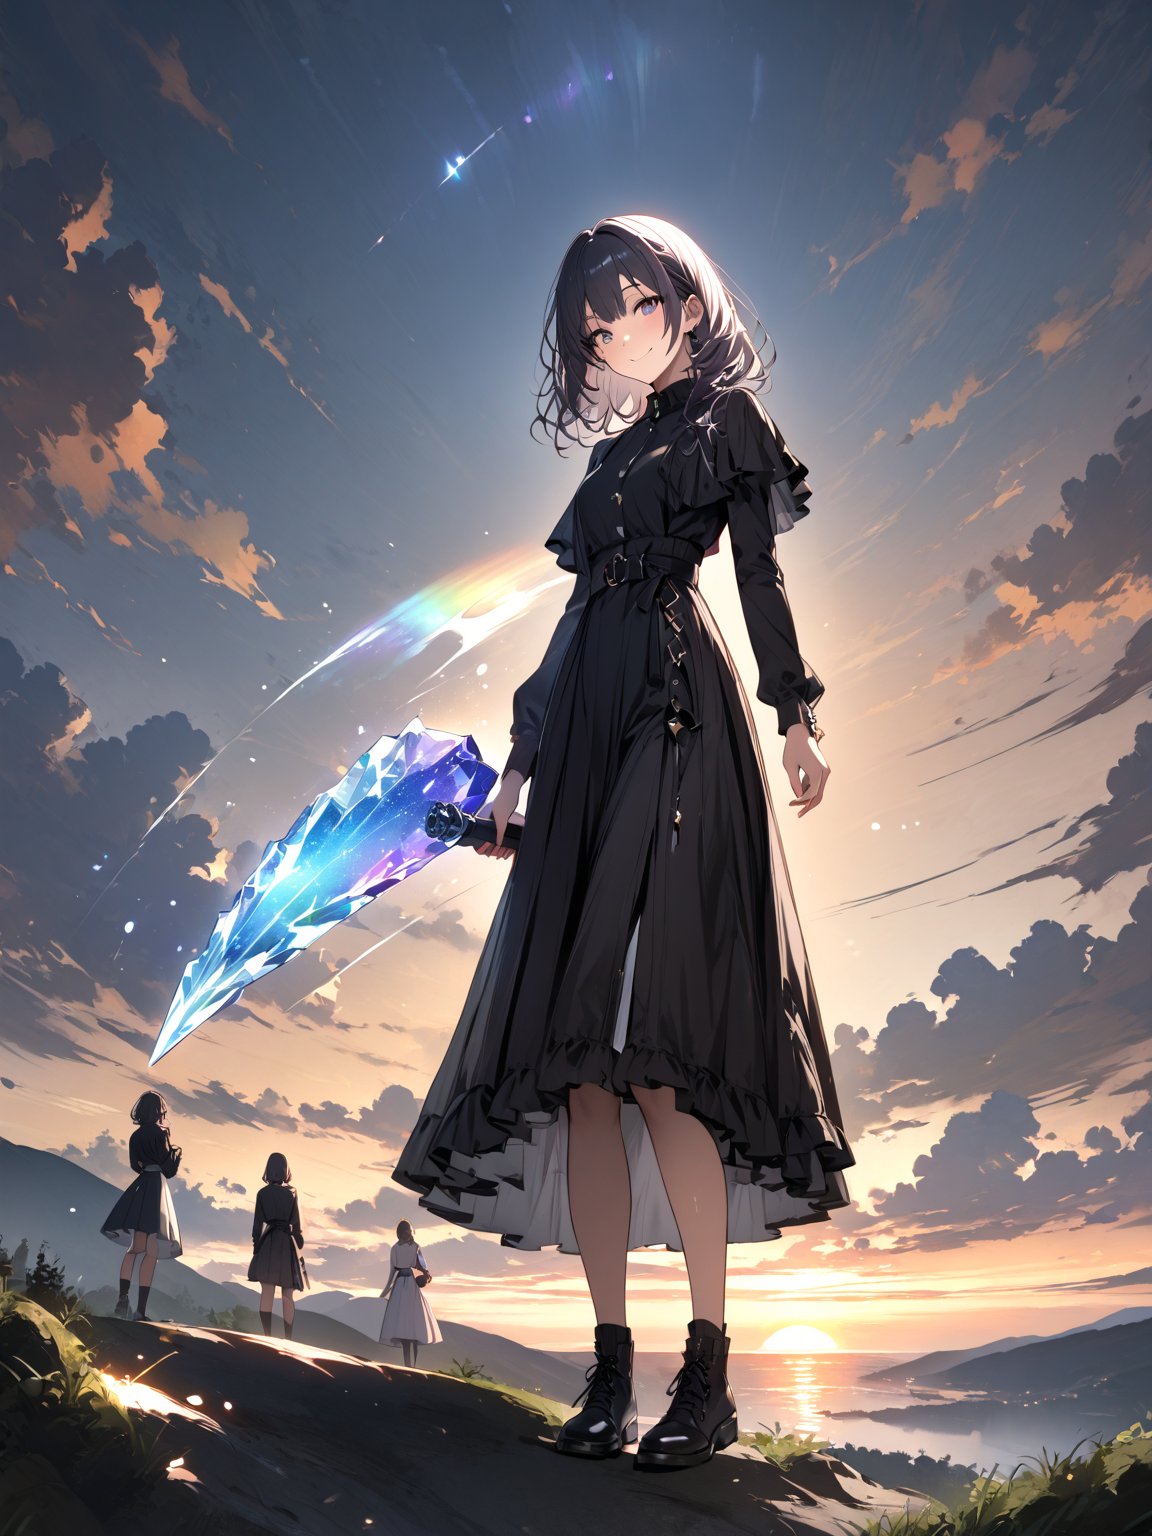 score_9,score_8_up,score_7_up,score_6_up, masterpiece, best quality, highres
,//Character, 
1girl, solo,SakayanagiArisu
,//Fashion, 

,//Background, 
,//Others, ,Expressiveh,
The girl standing triumphantly atop a hill, silhouetted against a beautiful sunset. She's holding a magical artifact that glows with rainbow colors. Her posture is confident, and a smile of accomplishment lights up her face. Fireflies dance around her, adding a magical touch to the scene.